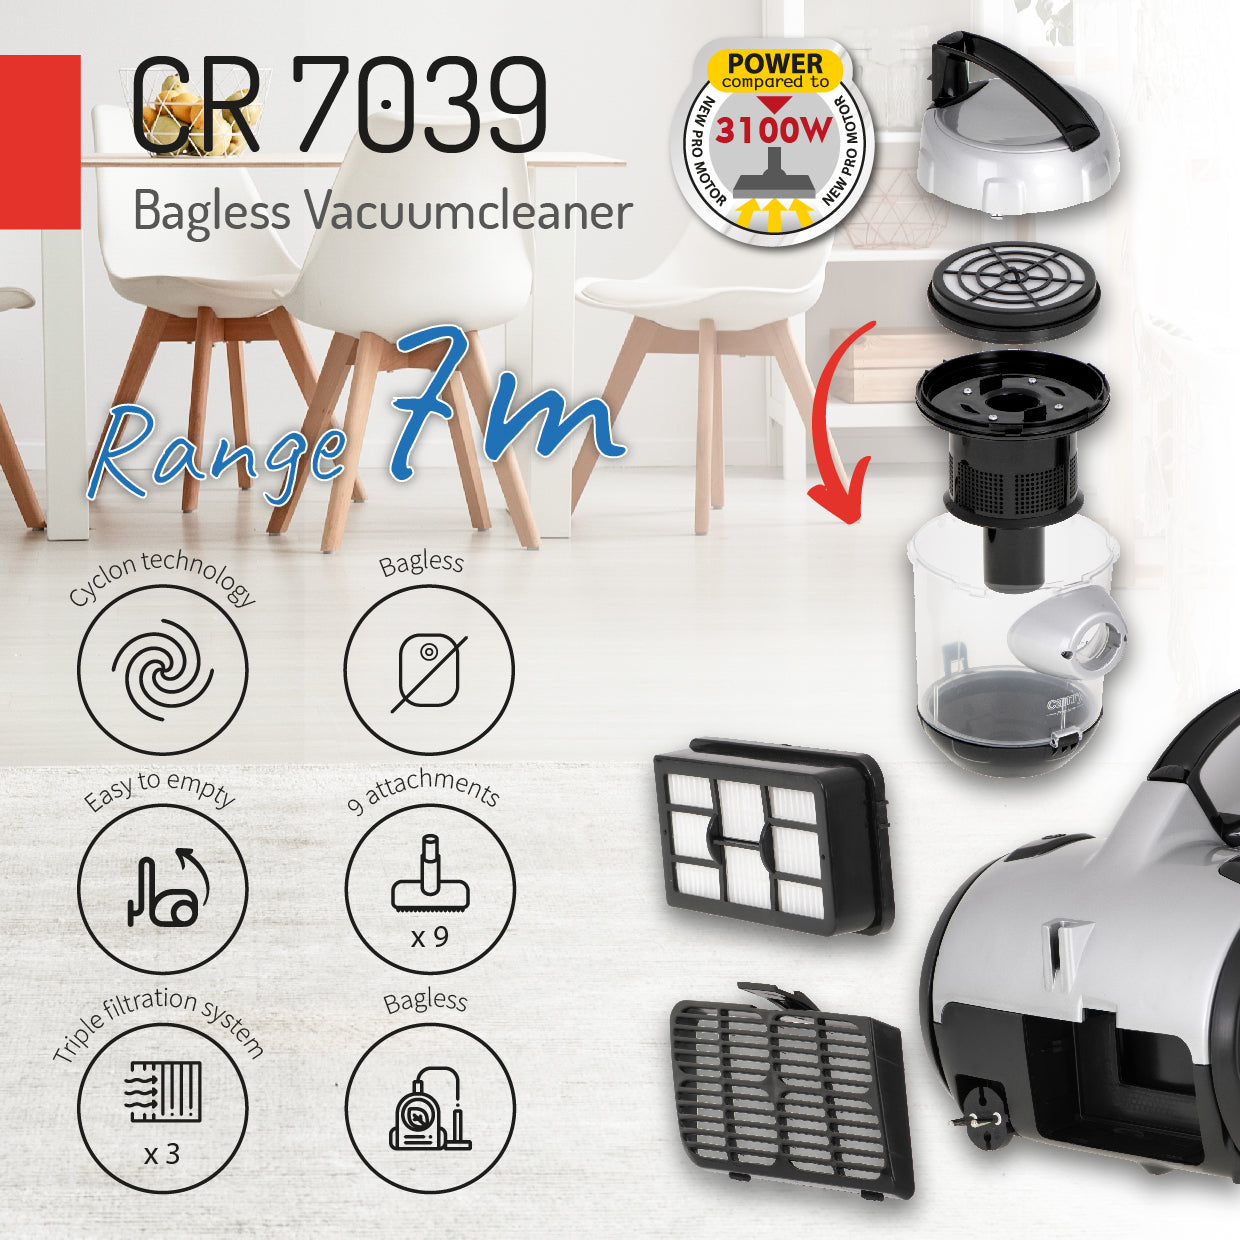 Camry CR7039 Bagless Vacuum Cleaner 700W